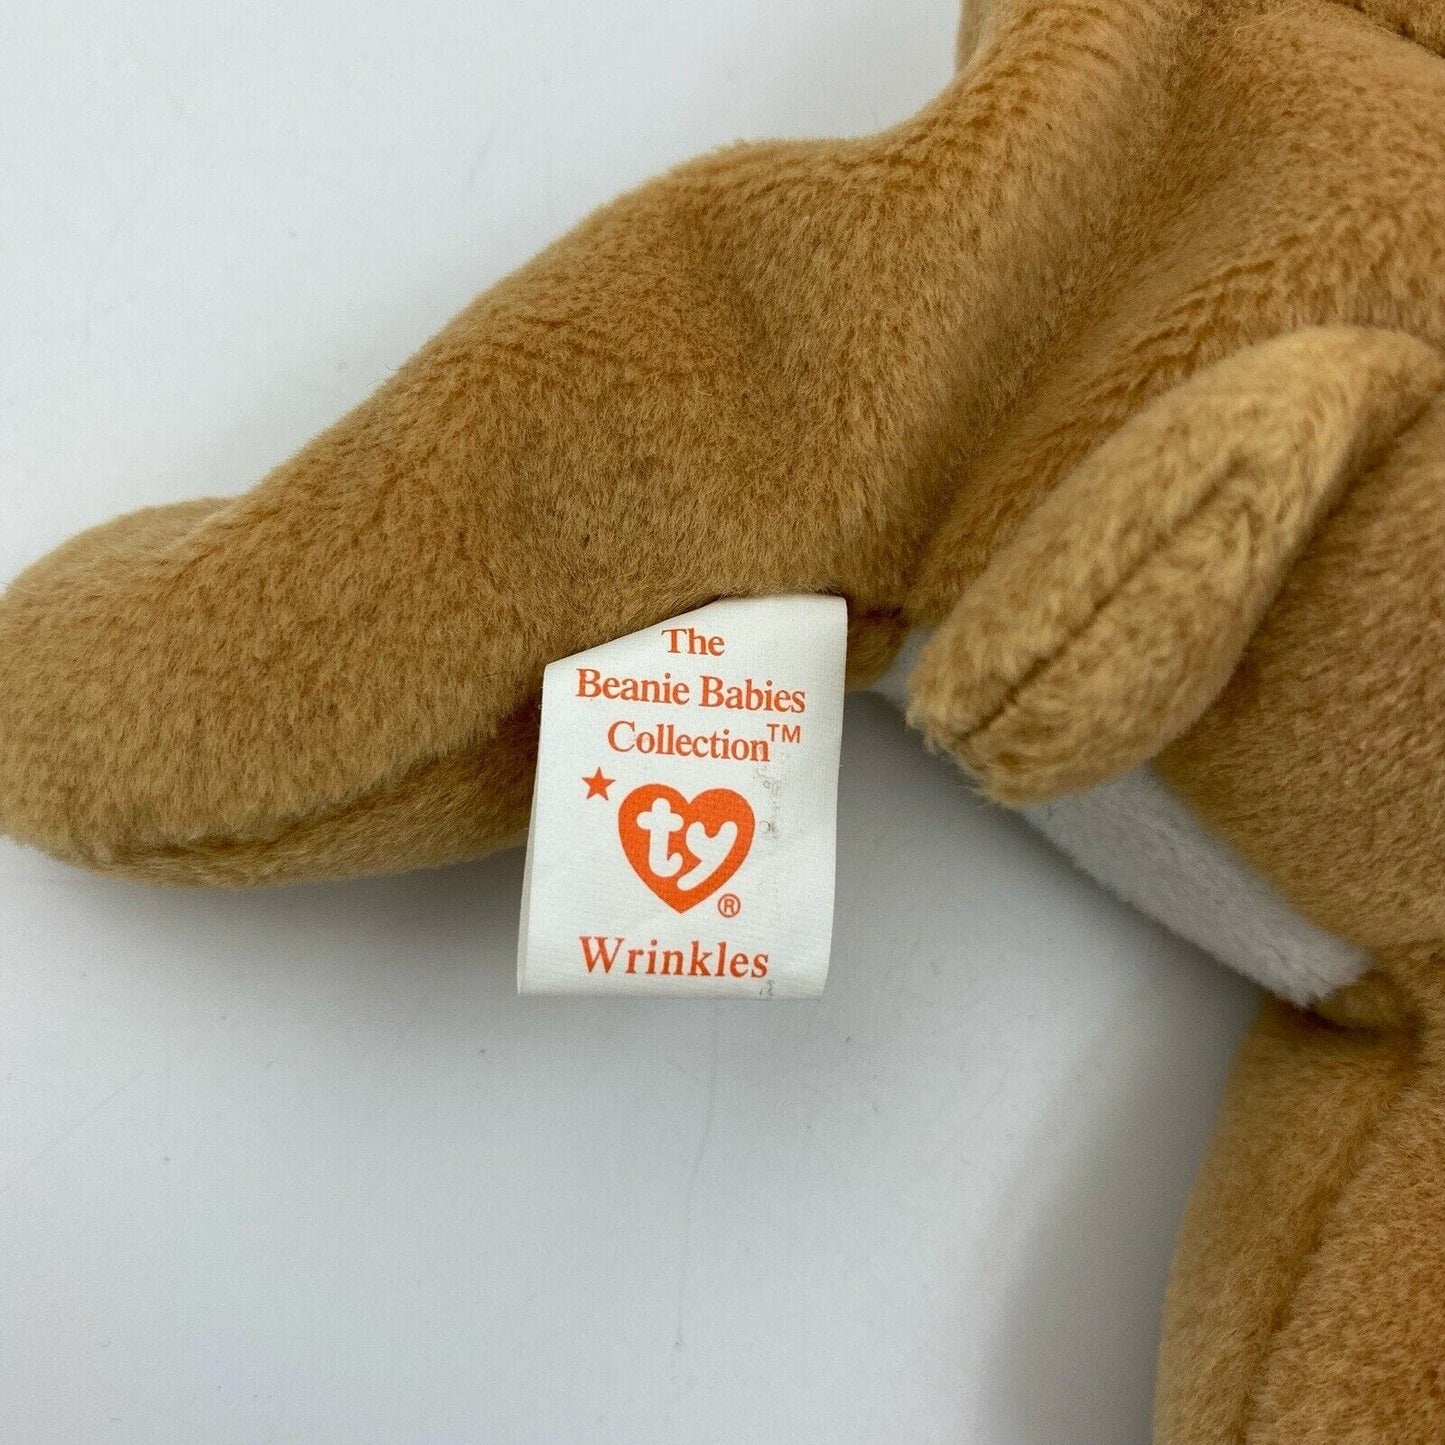 Ty Original Beanie Babies “Wrinkles” The Dog 1996 MINT Condition - Tag Errors